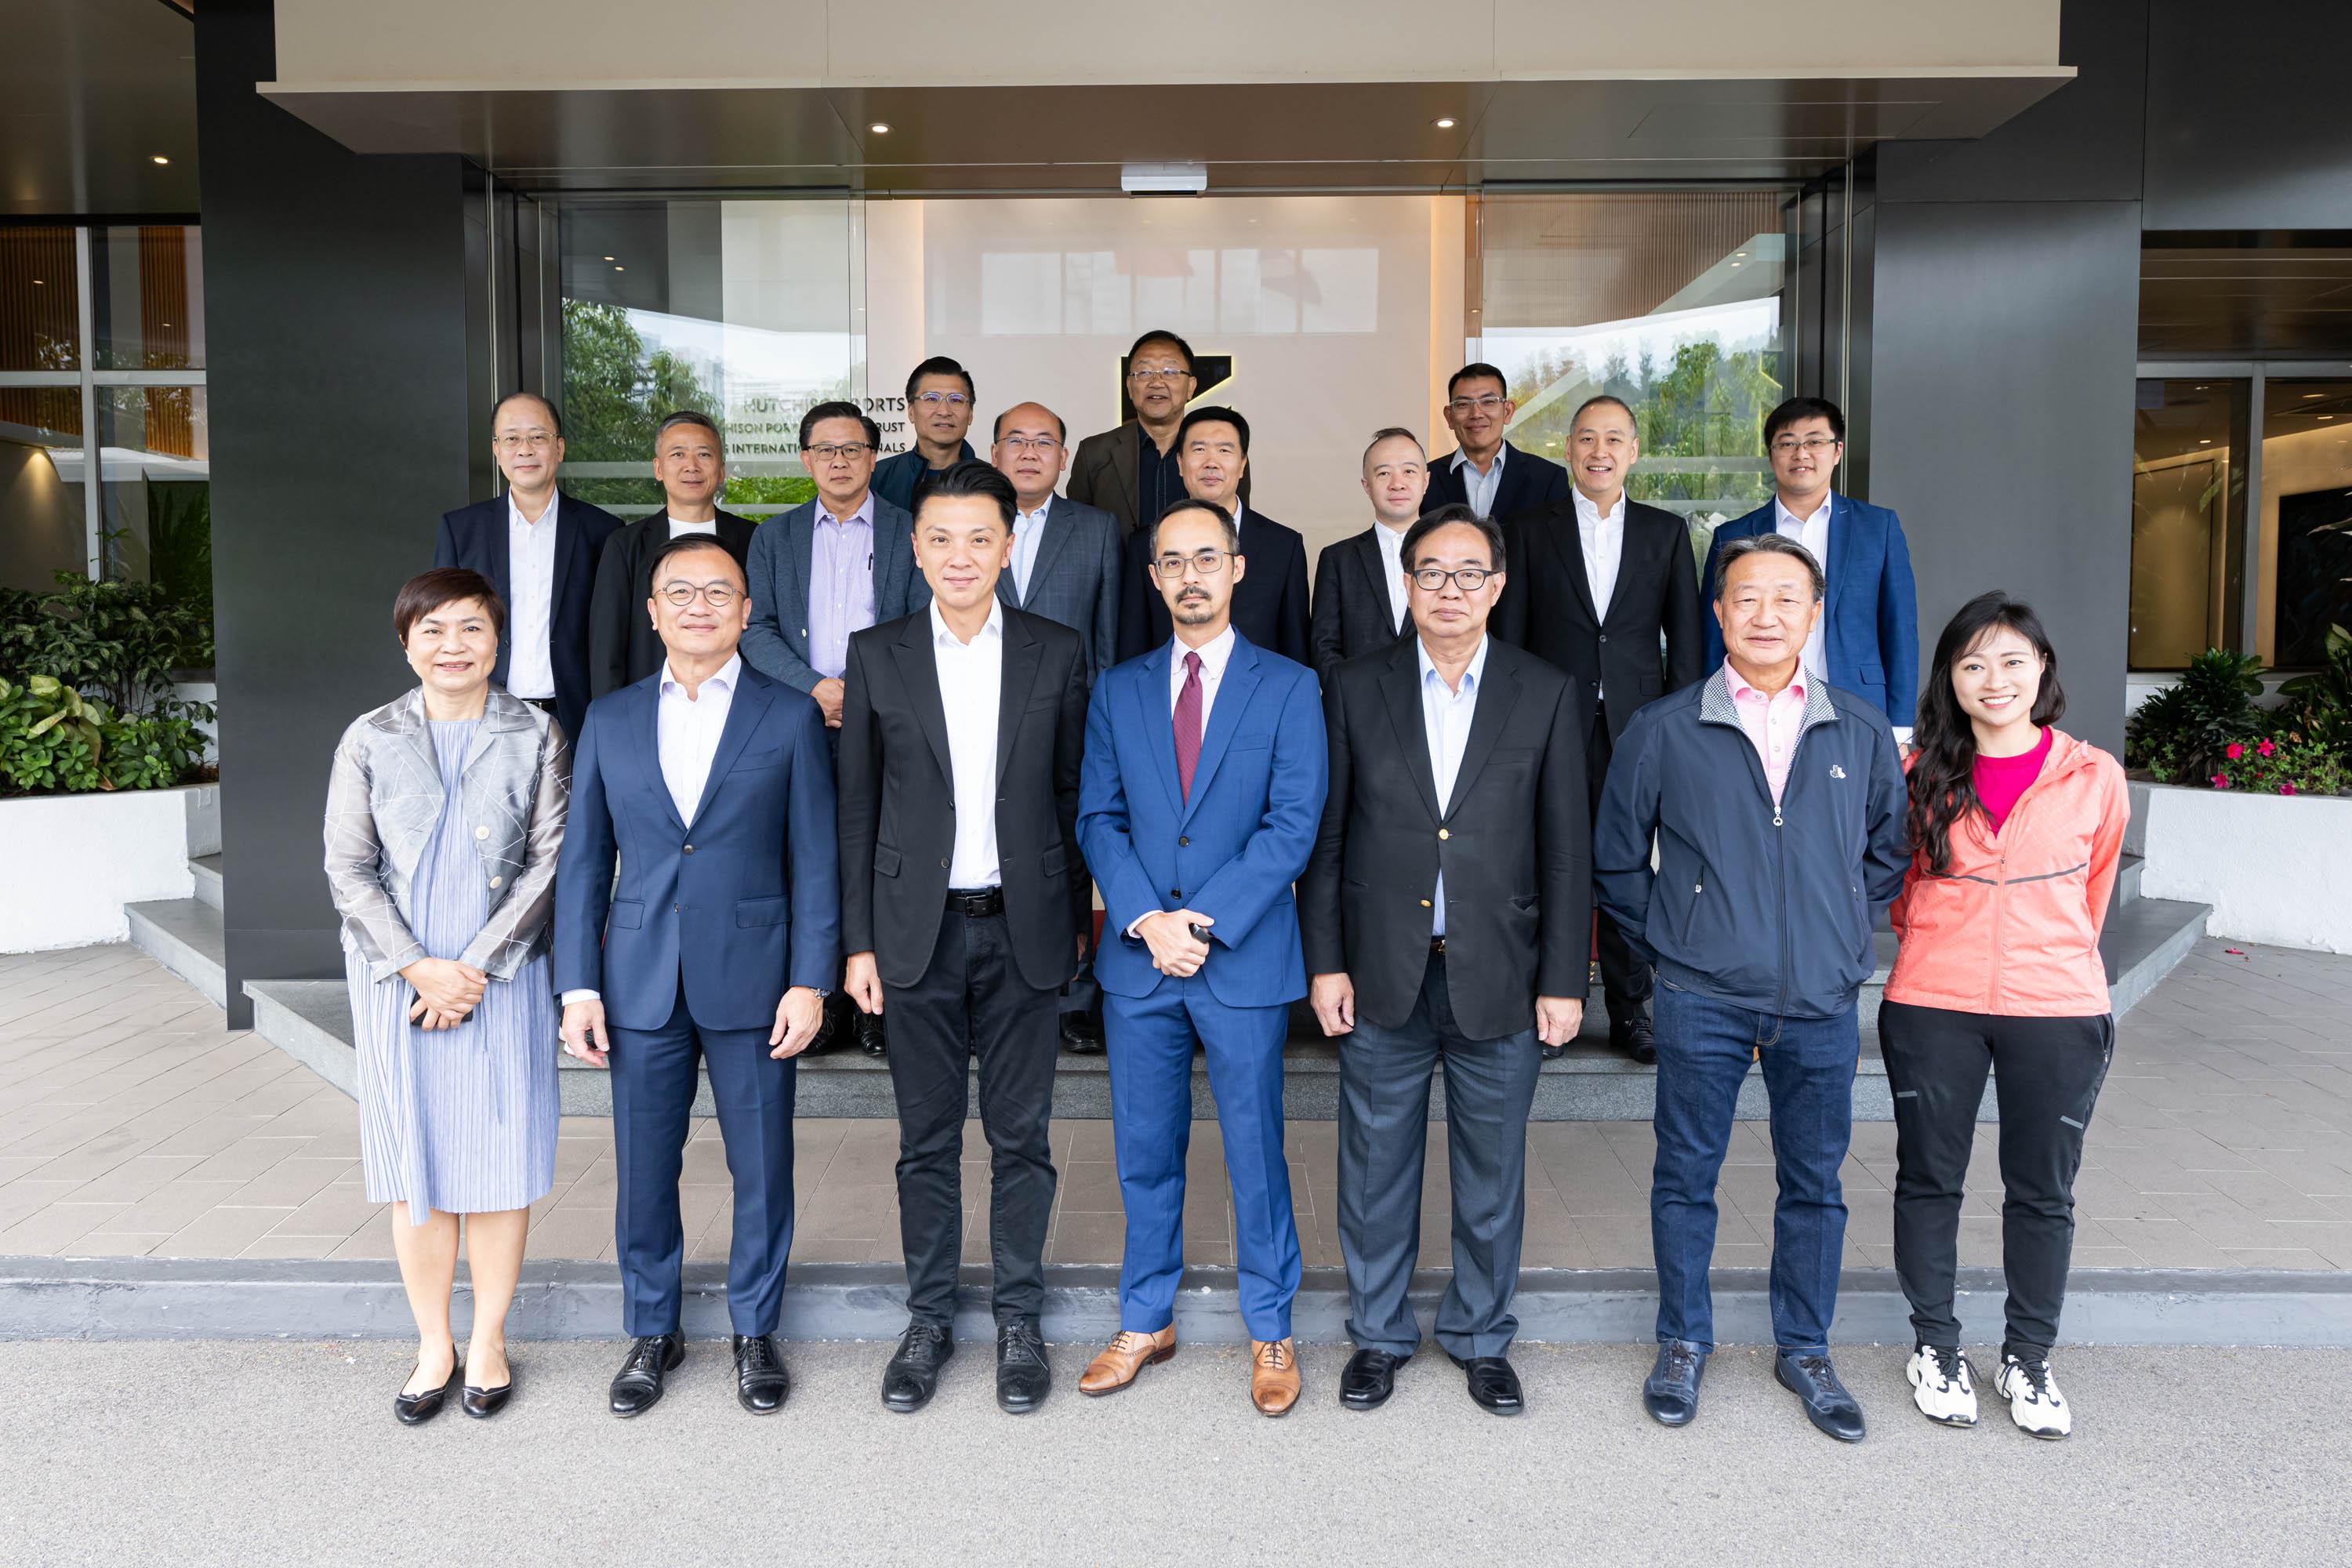 The Legislative Council (LegCo) Panel on Economic Development visited the Kwai Tsing Container Terminals (KTCT) today (November 7) to further understand the latest developments of the terminals' digital operations and the logistics industry. Photo shows LegCo Members posing for a group photo with representatives of the KTCT.